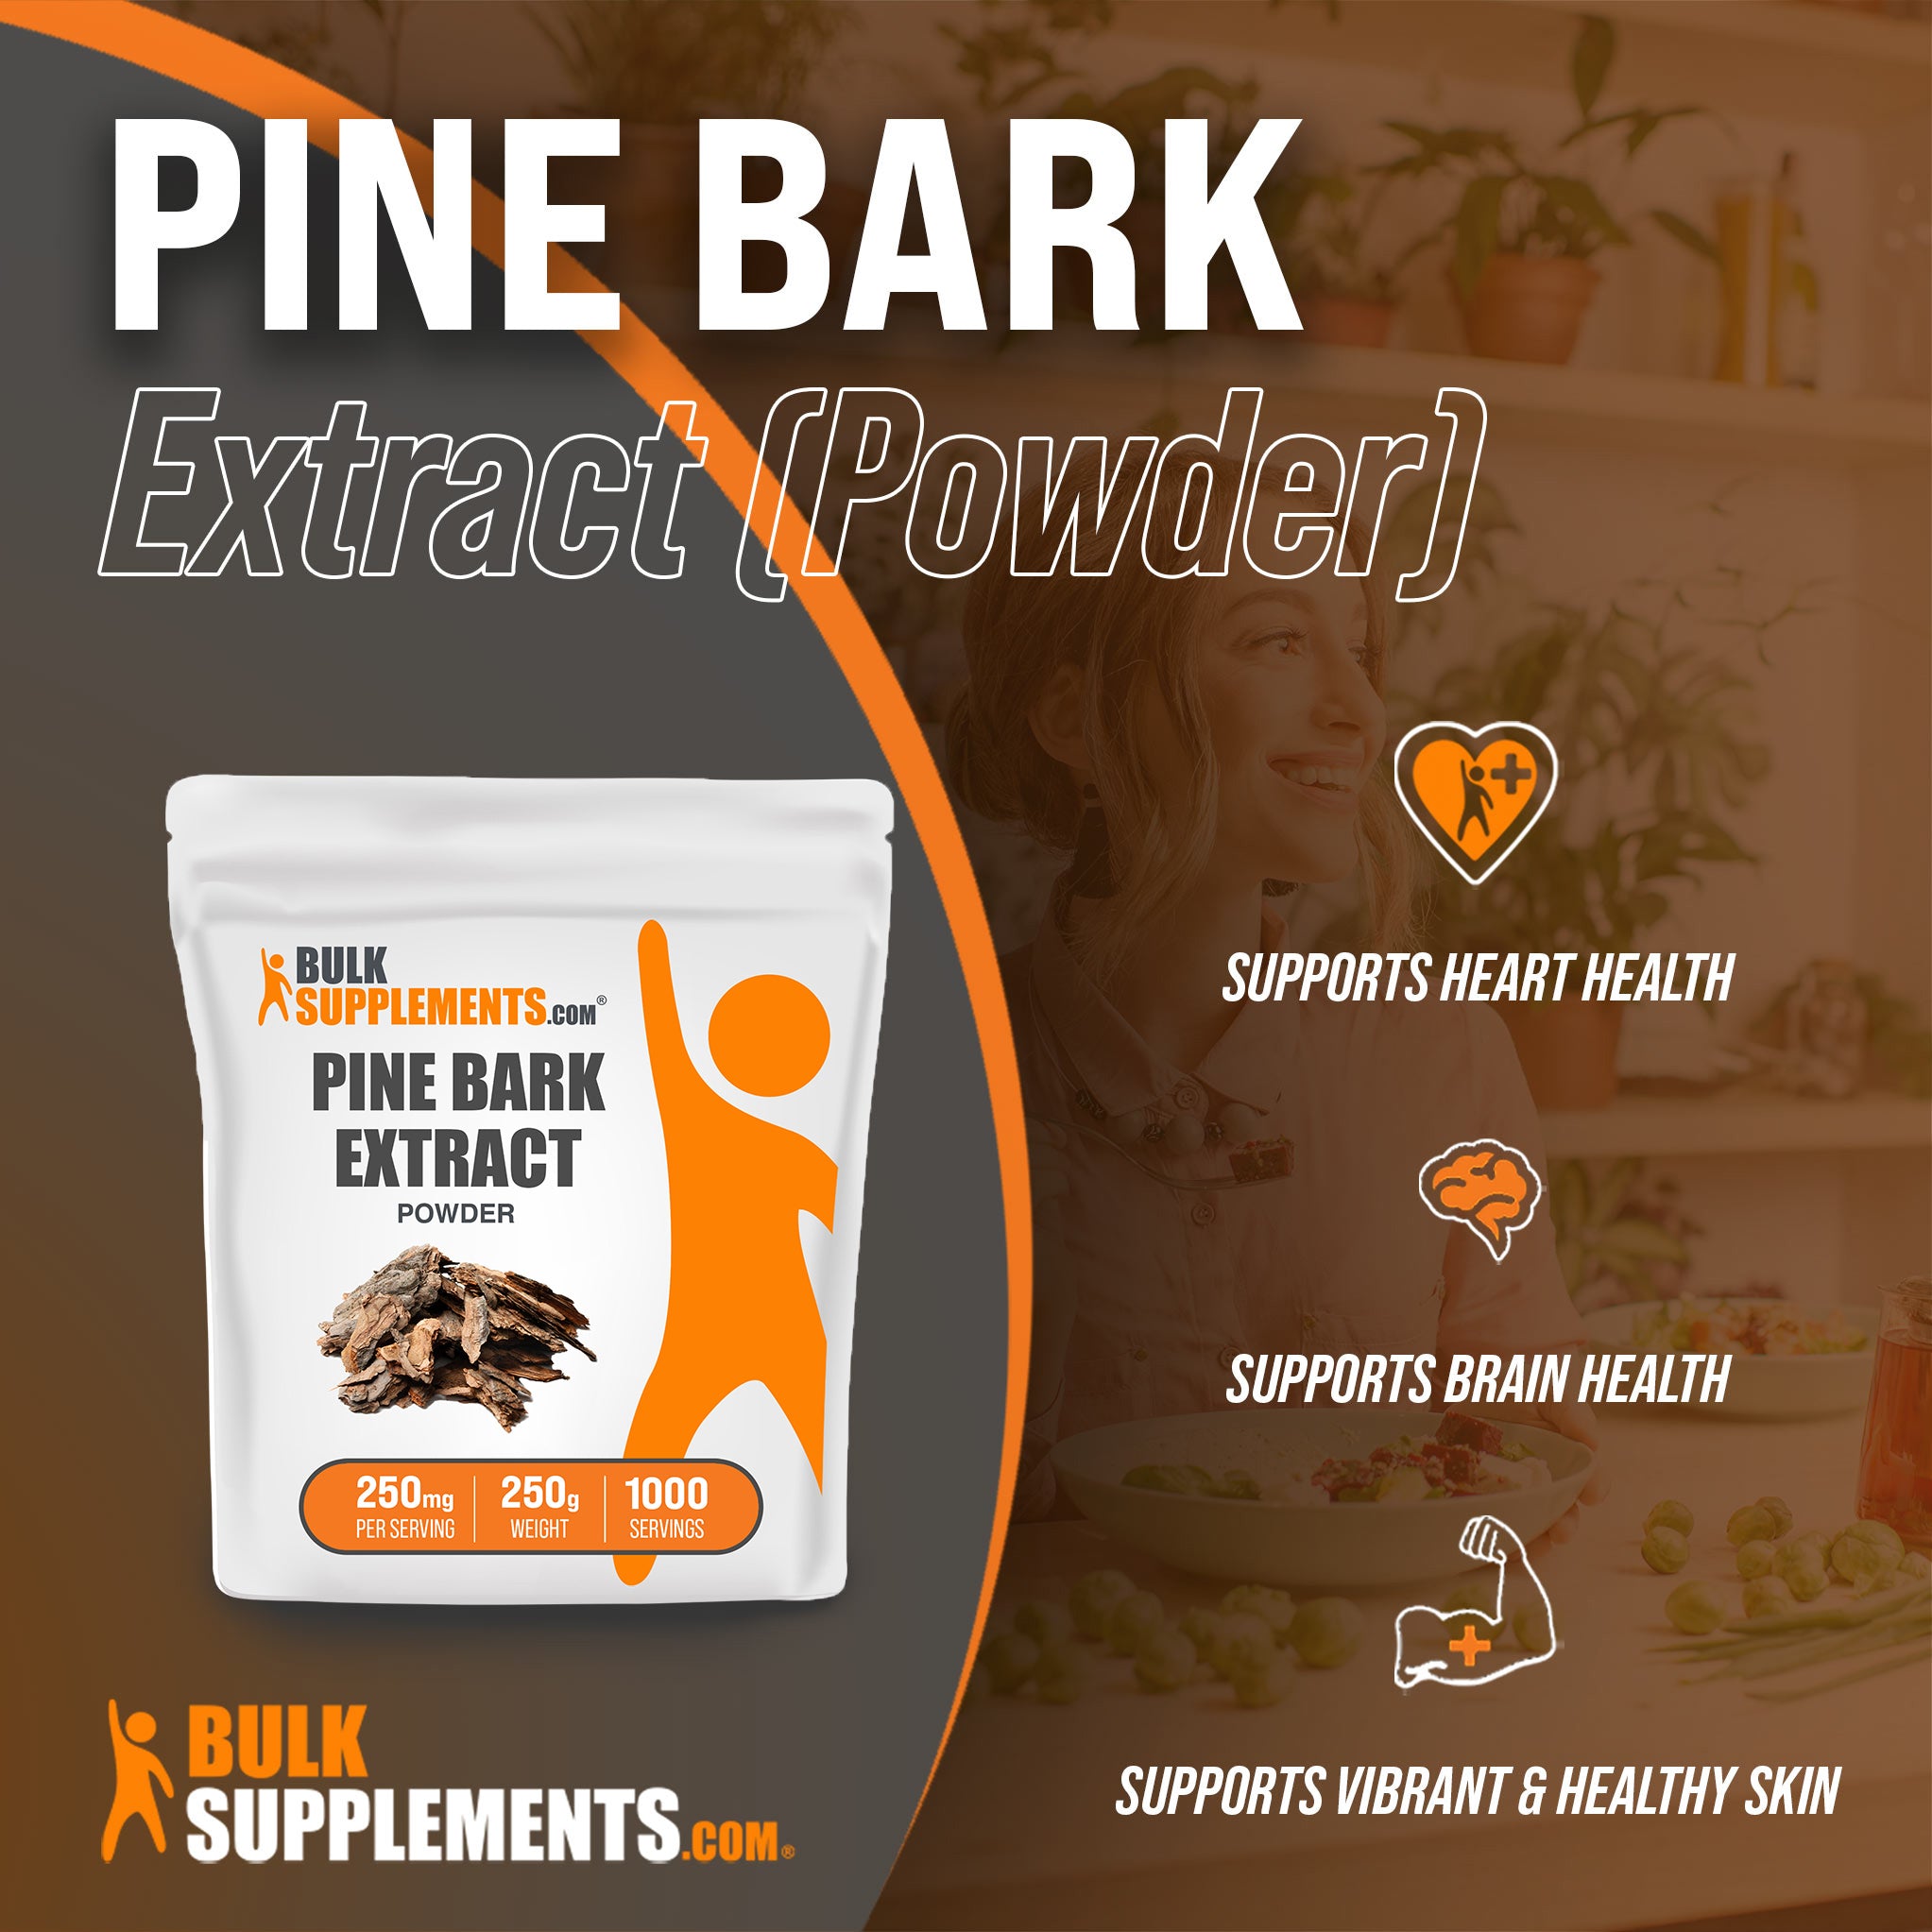 7 Science-Backed Benefits of Pine Bark Extract - Herbal Extract